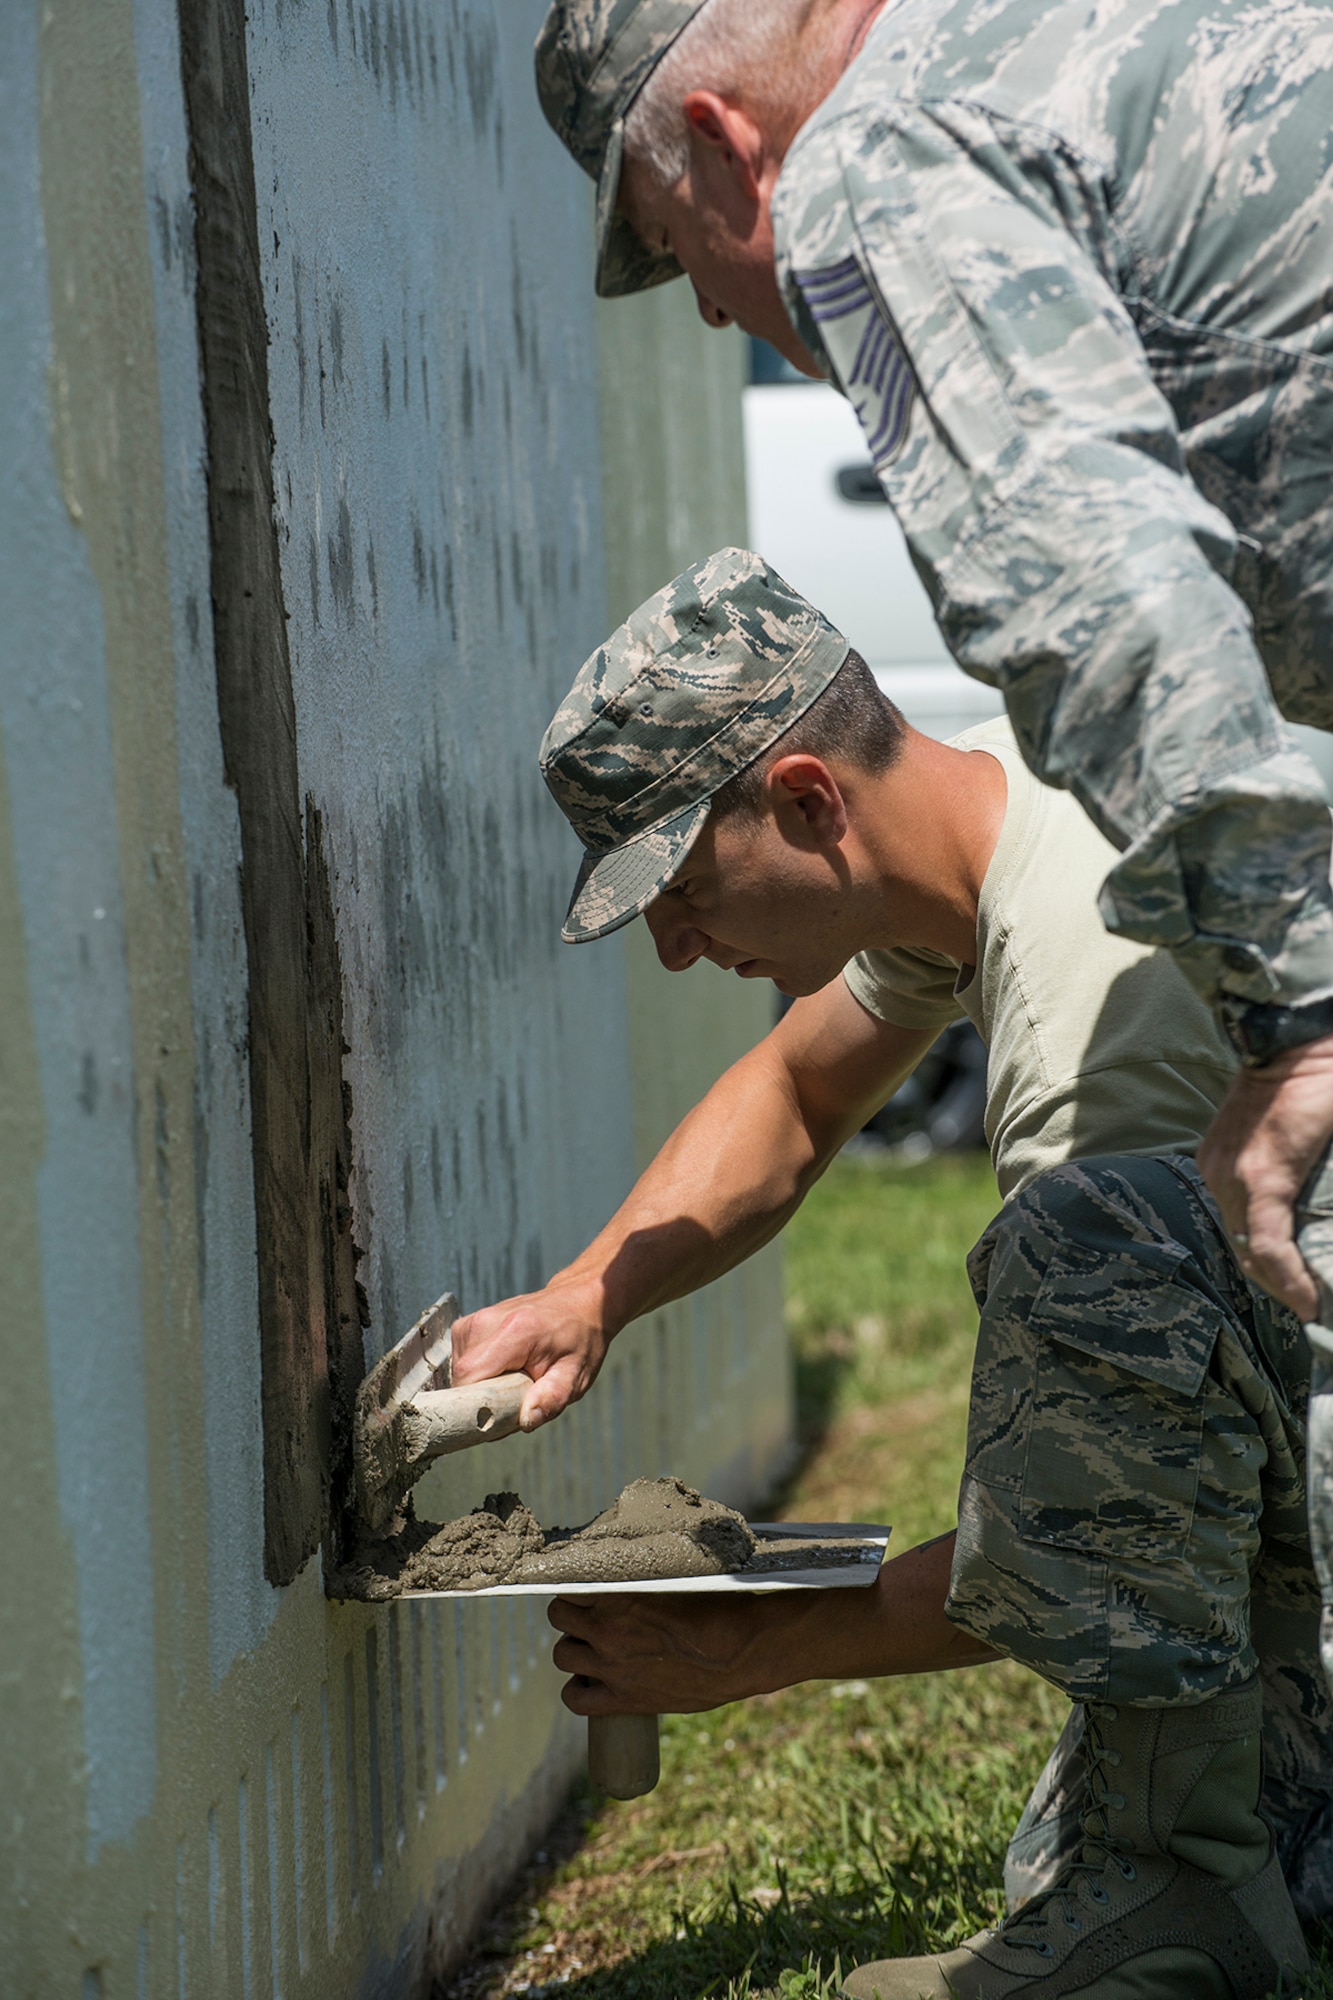 An Airmen assigned to the 307th Civil Engineer Squadron is learning how to evenly and smoothly spread concrete to fill holes in the 307th Bomb Wing headquarters sign on April 11, 2018, Barksdale Air Force Base, La.